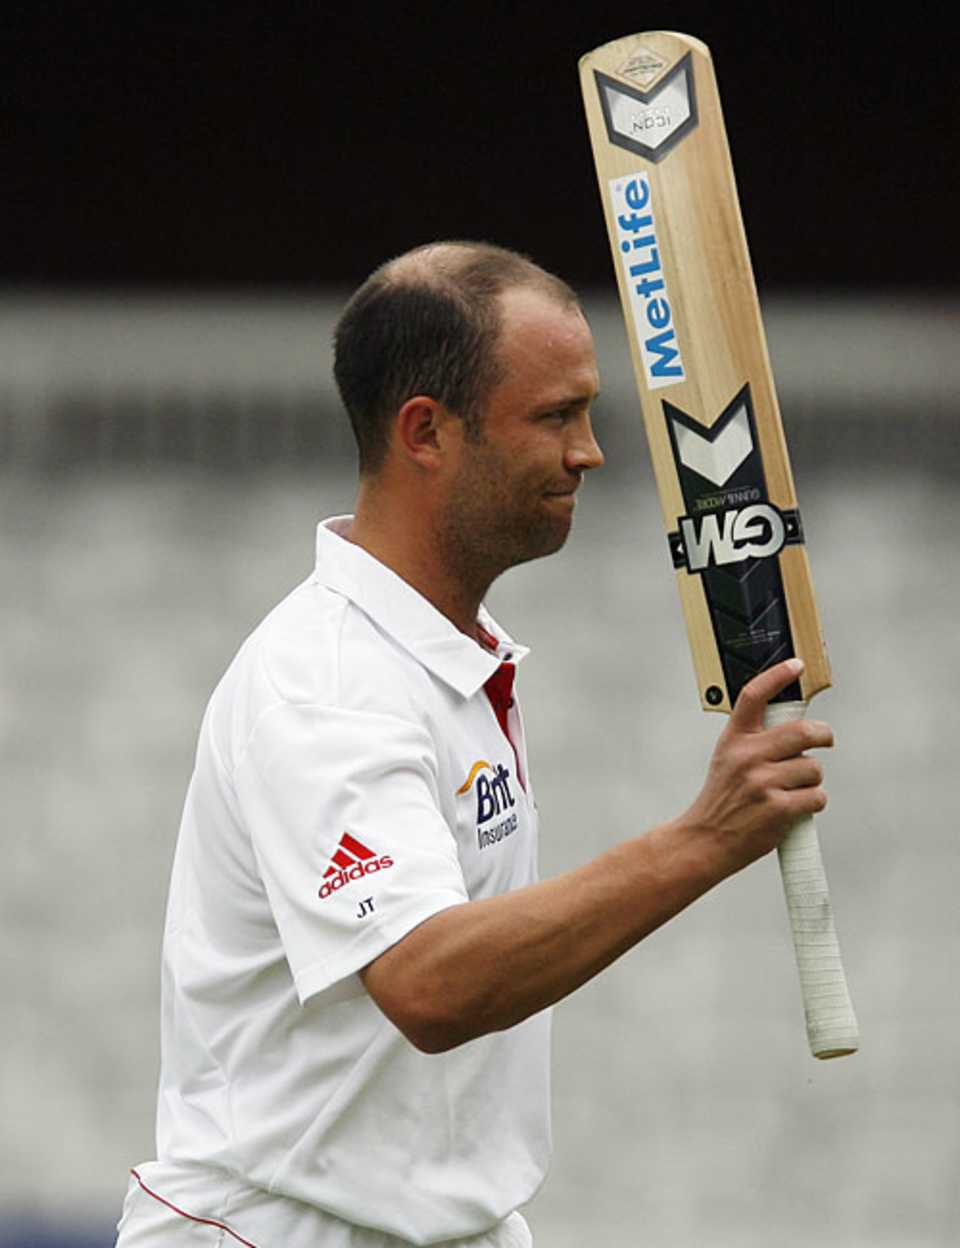 Jonathan Trott completed a very satisfying match for him by hitting the winning runs to end unbeaten on 36